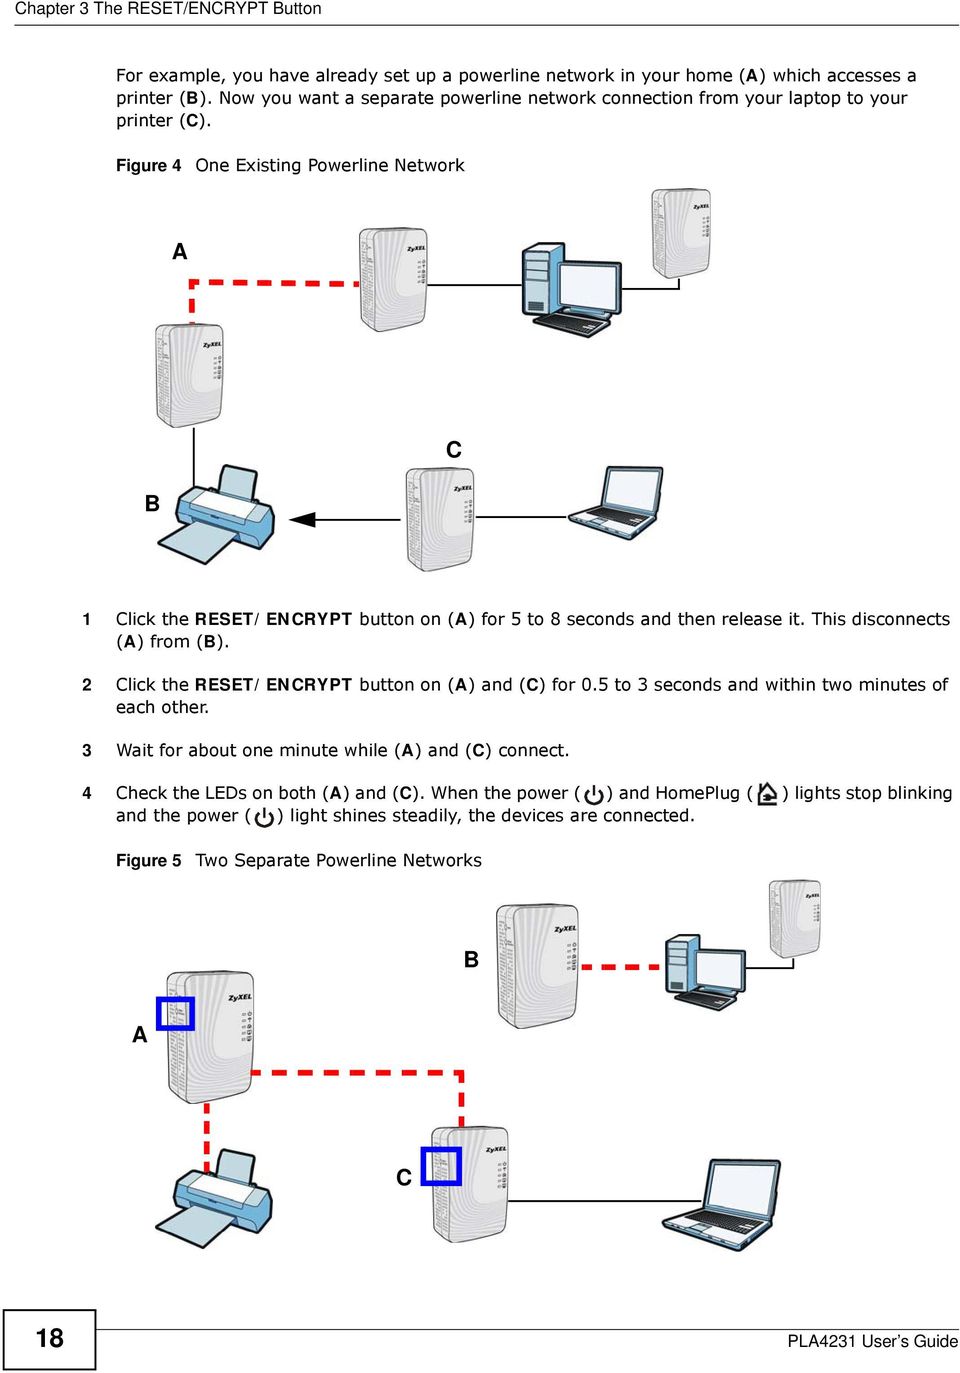 Figure 4 One Existing Powerline Network A B C 1 Click the RESET/ENCRYPT button on (A) for 5 to 8 seconds and then release it. This disconnects (A) from (B).